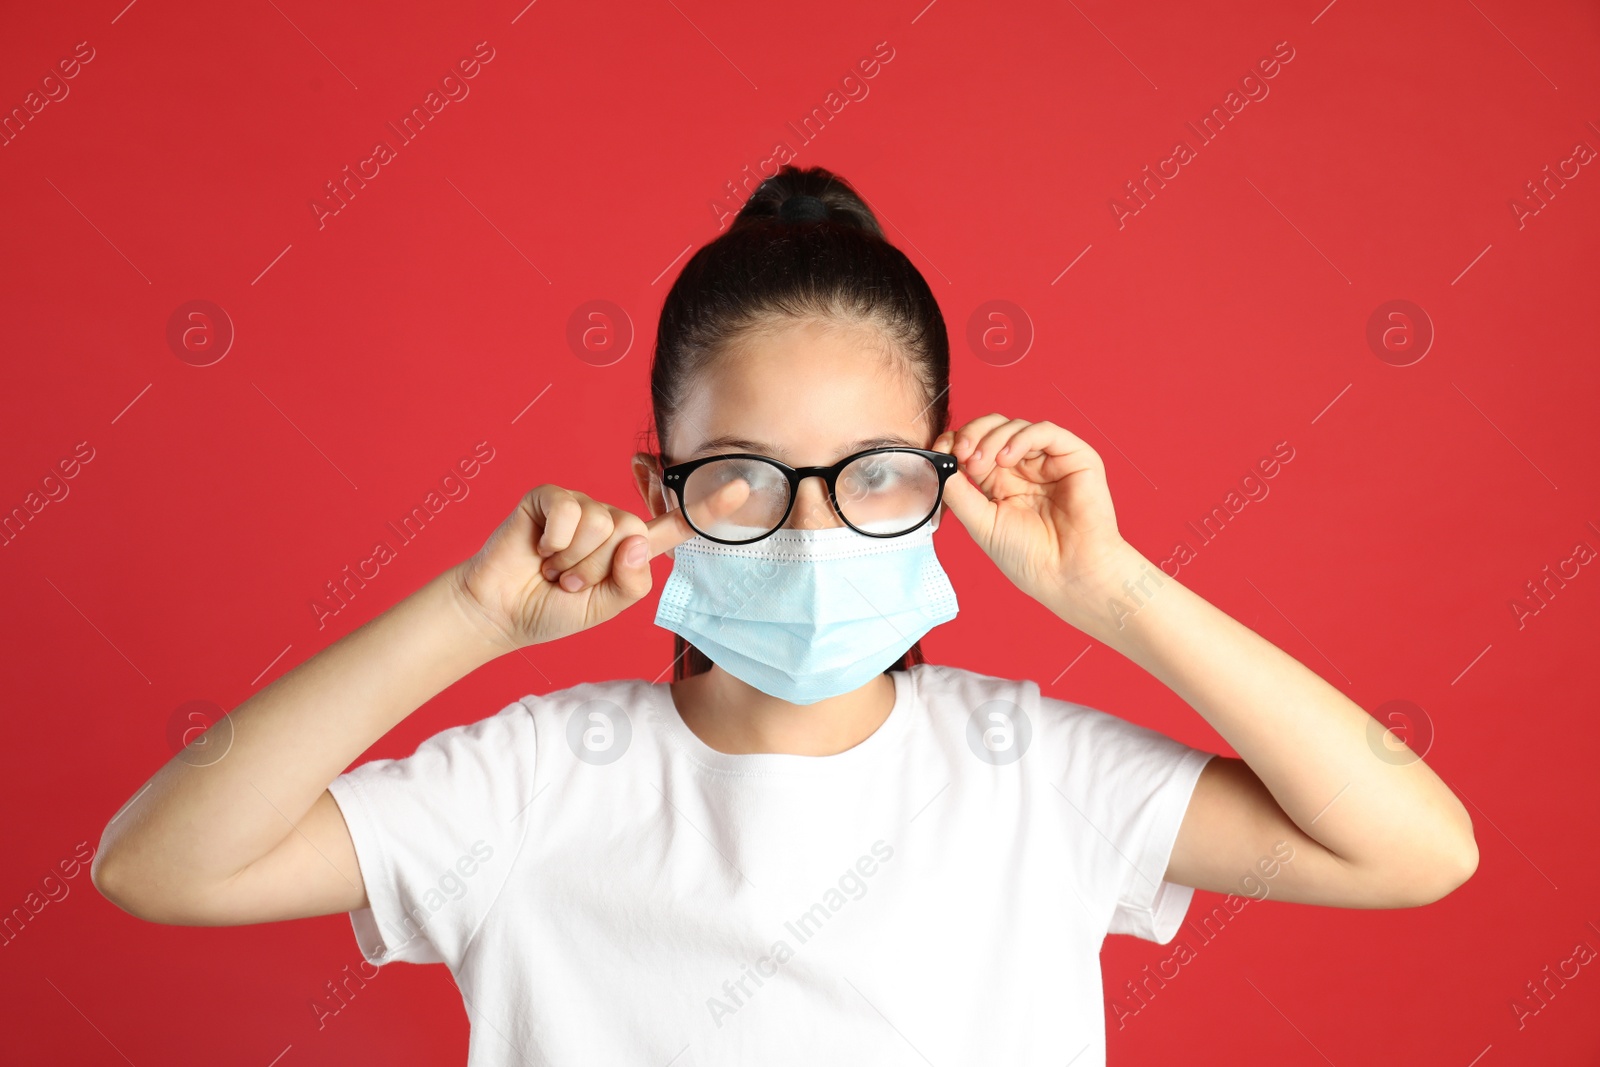 Photo of Little girl wiping foggy glasses caused by wearing medical face mask on red background. Protective measure during coronavirus pandemic